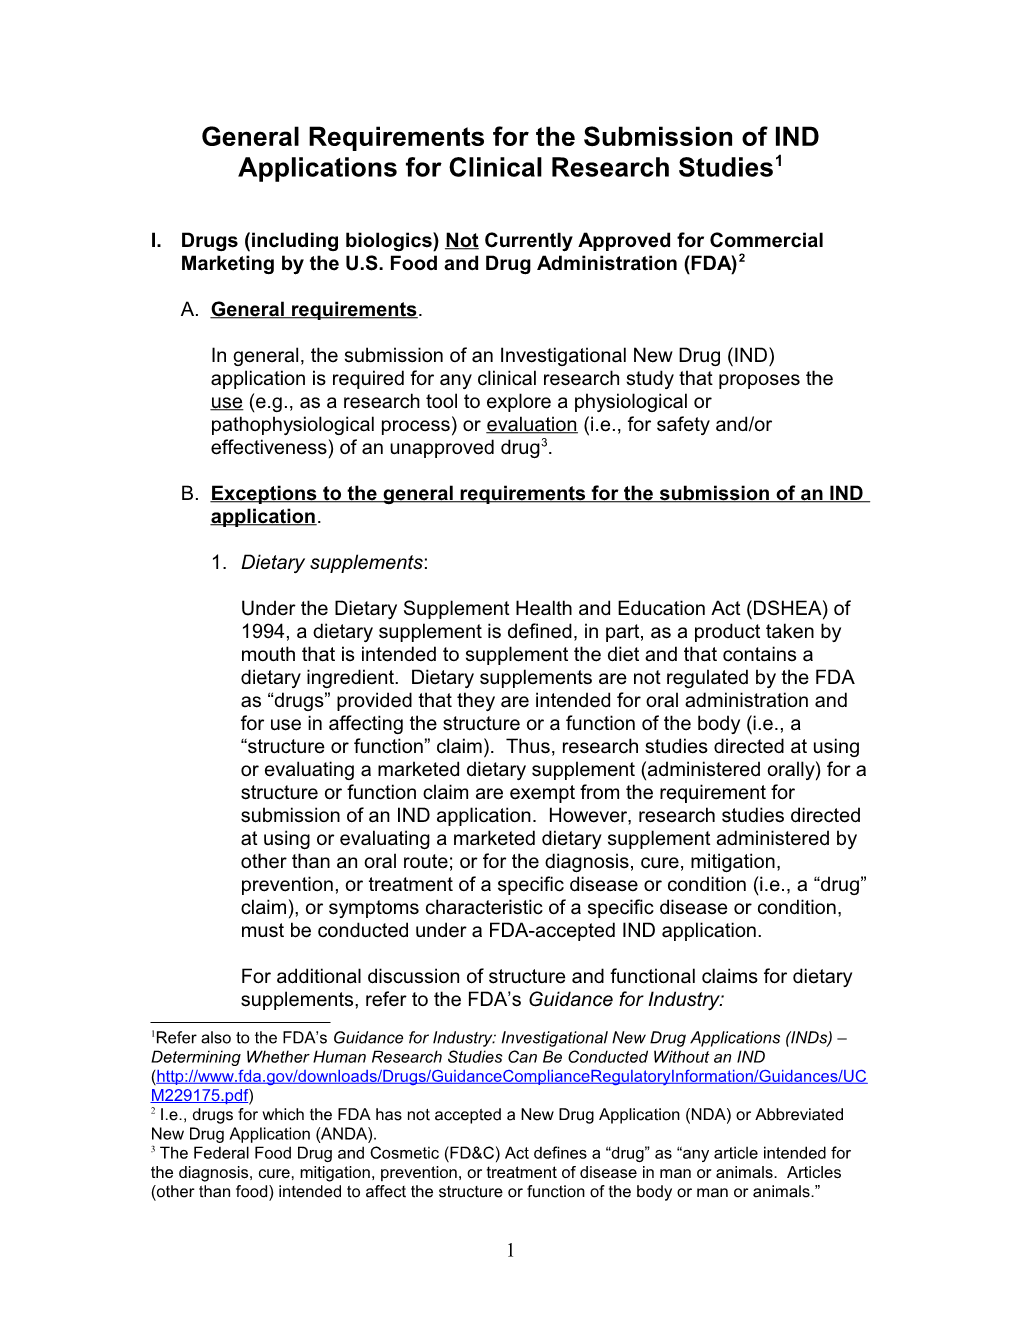 General Requirements For The Submission Of IND And IDE Applications For Clinical Research Studies